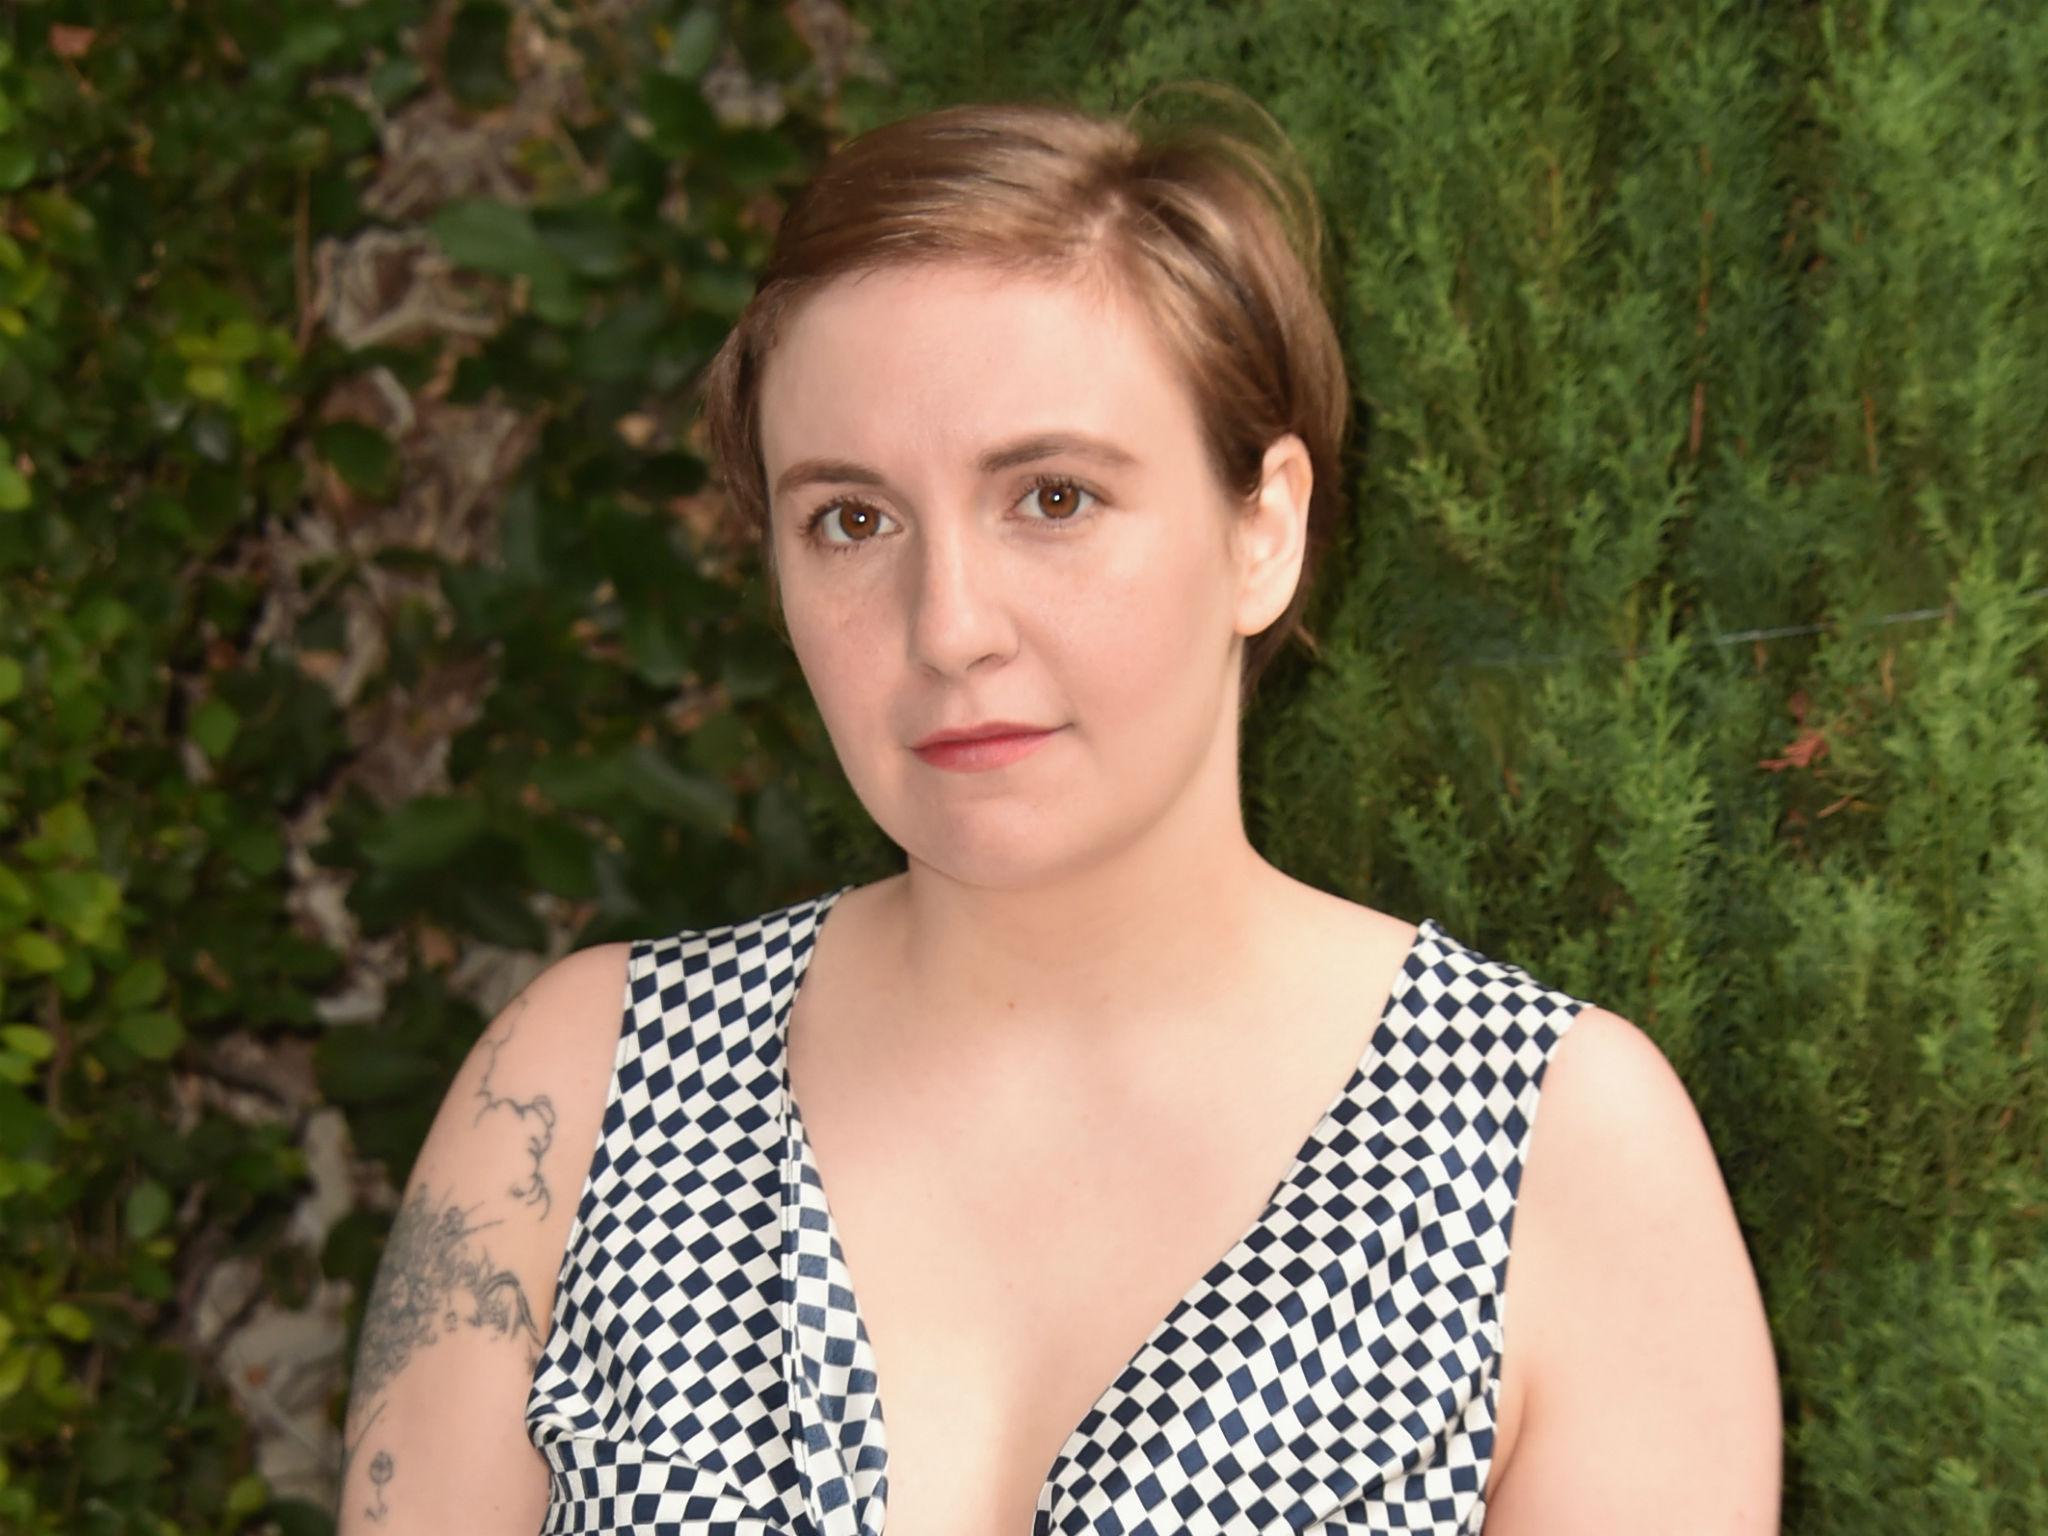 Stanford rape case Lena Dunham and the cast of Girls dedicate video message to survivor The Independent The Independent image